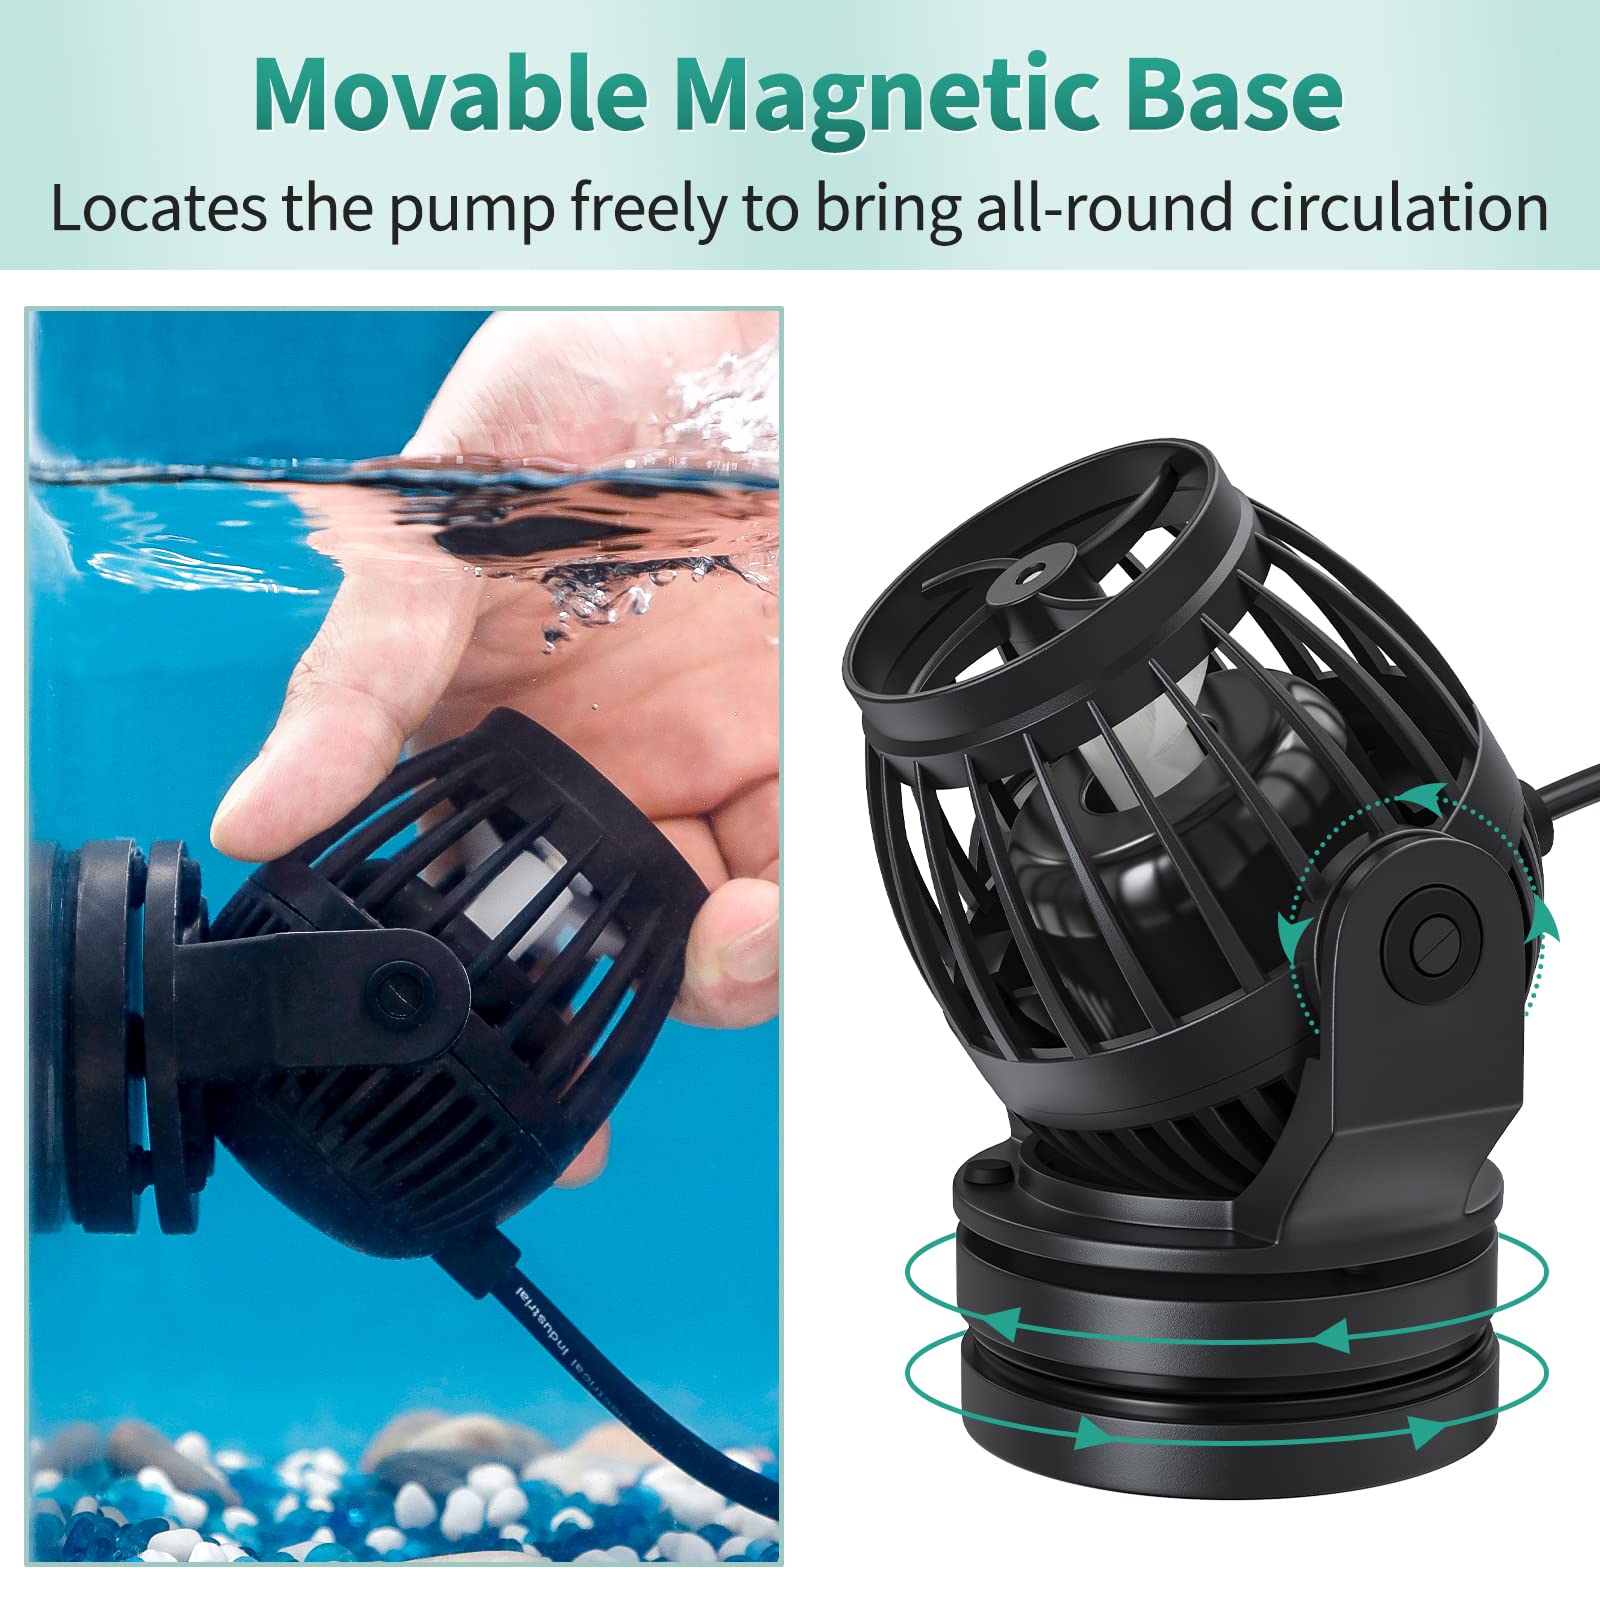 Uniclife Aquarium Wave Maker for 60-120 Gallon Fish Tanks 2100 GPH Adjustable Circulation Pump with Controller and Strong Magnetic Suction Base Submersible Power Head for Fresh and Salty Water